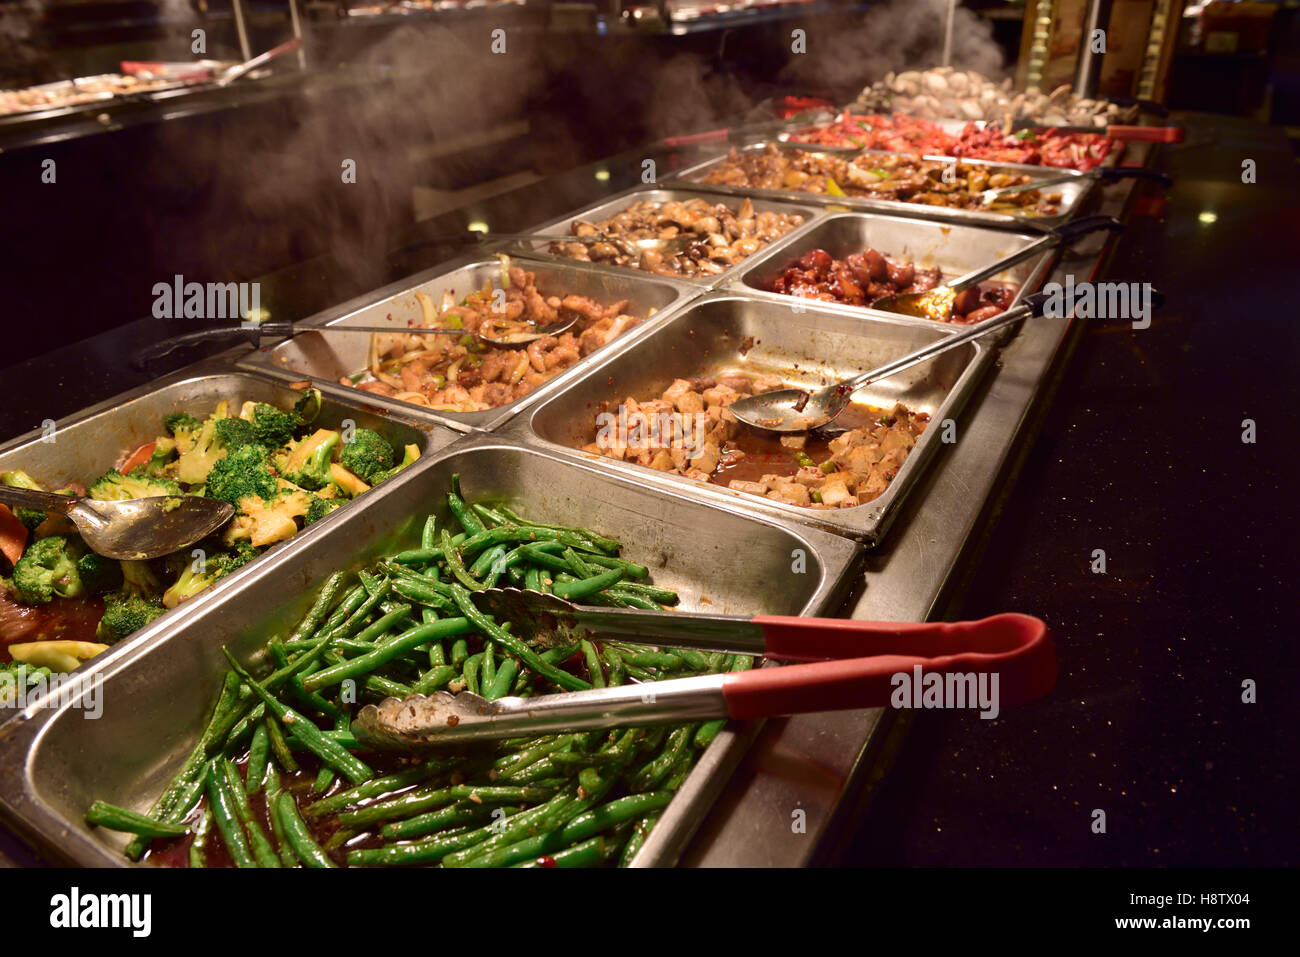 Buffet selection in “all you can eat” restaurant Stock Photo